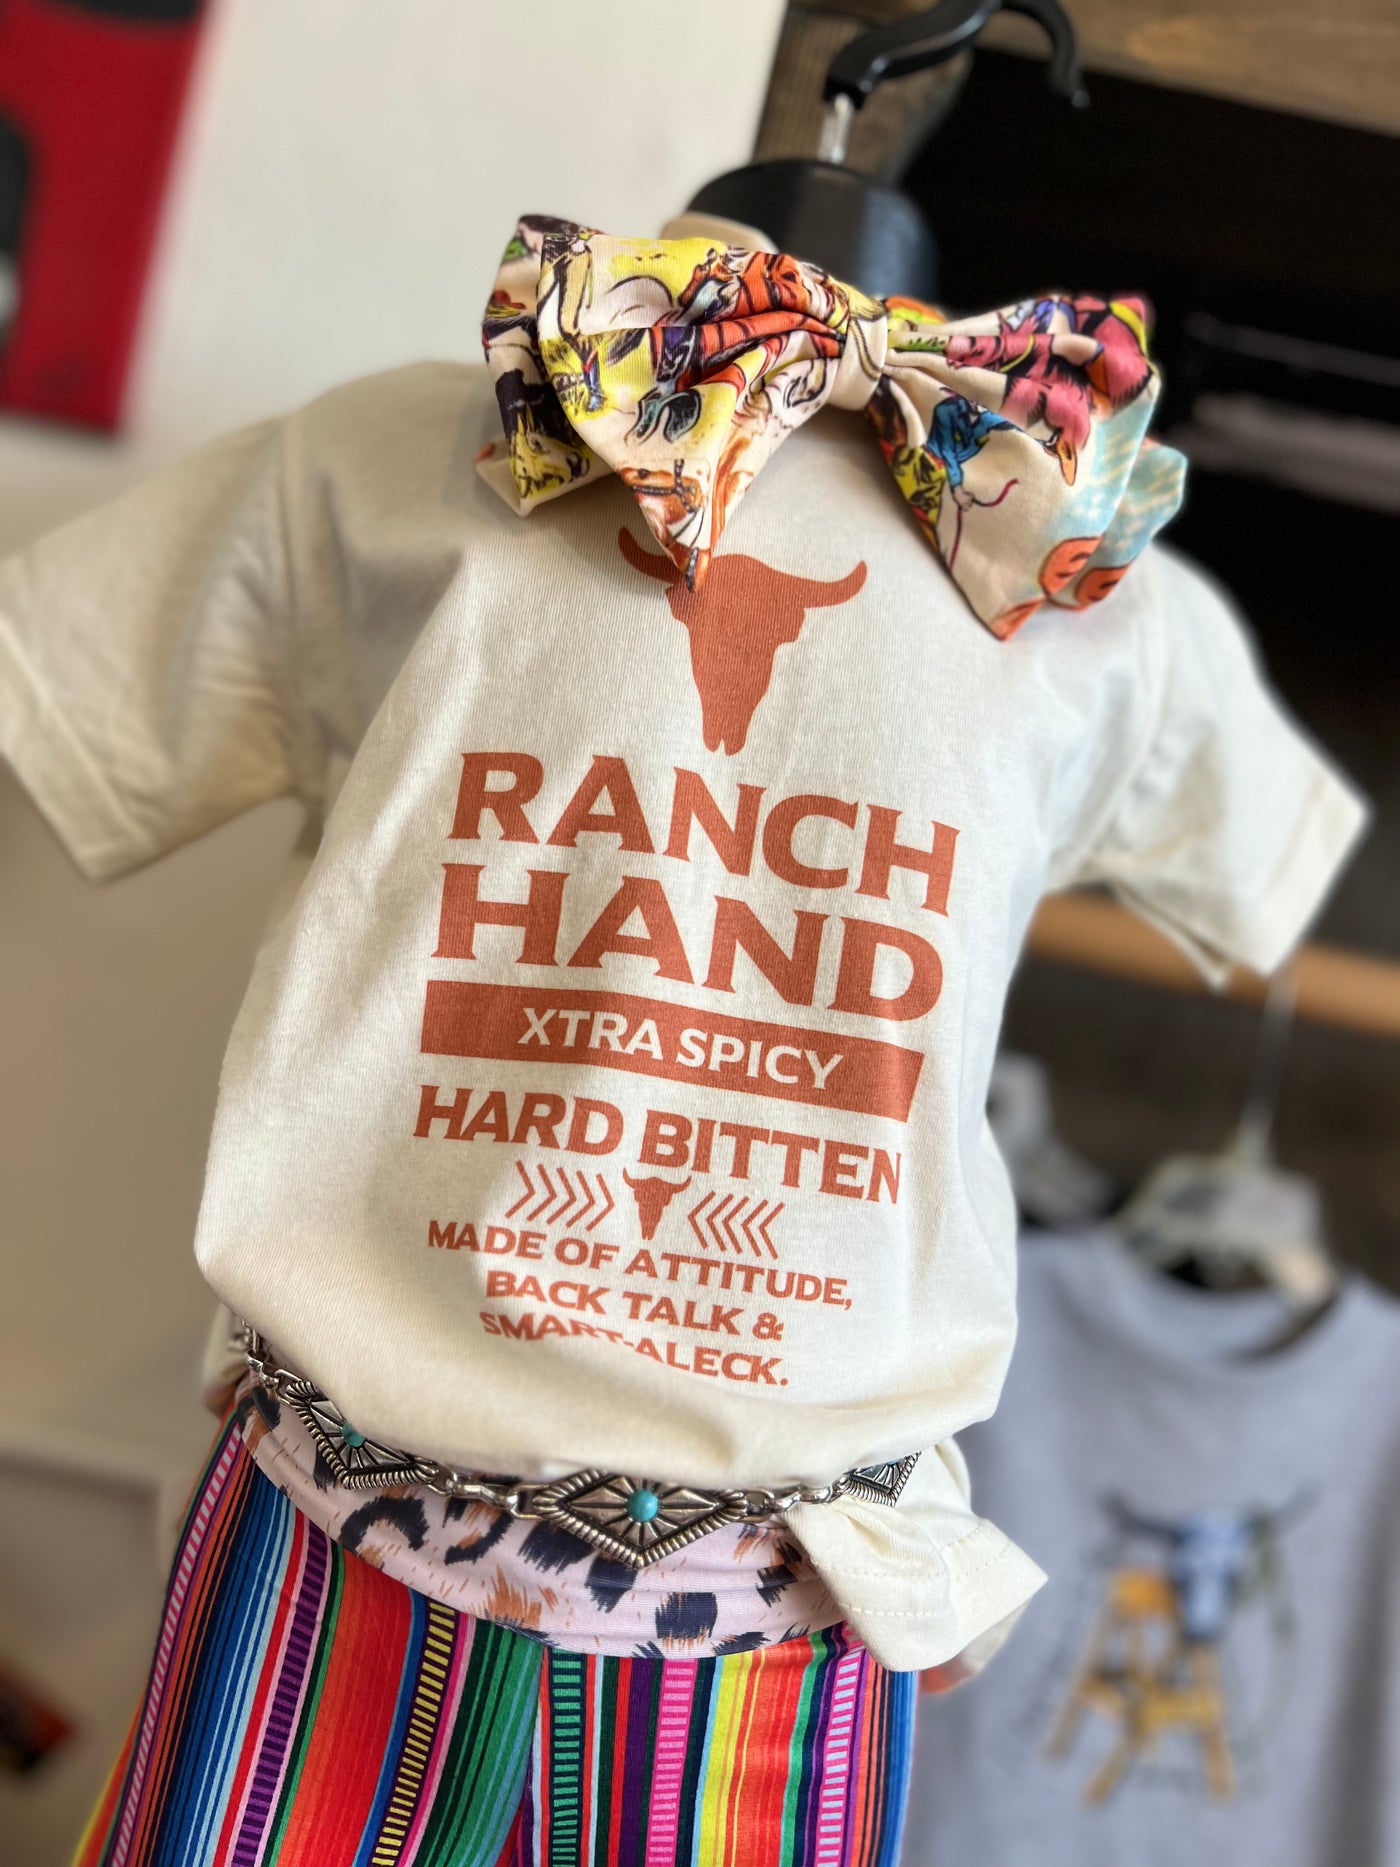 Spicy Ranch Hand Onsie & T - Shirts